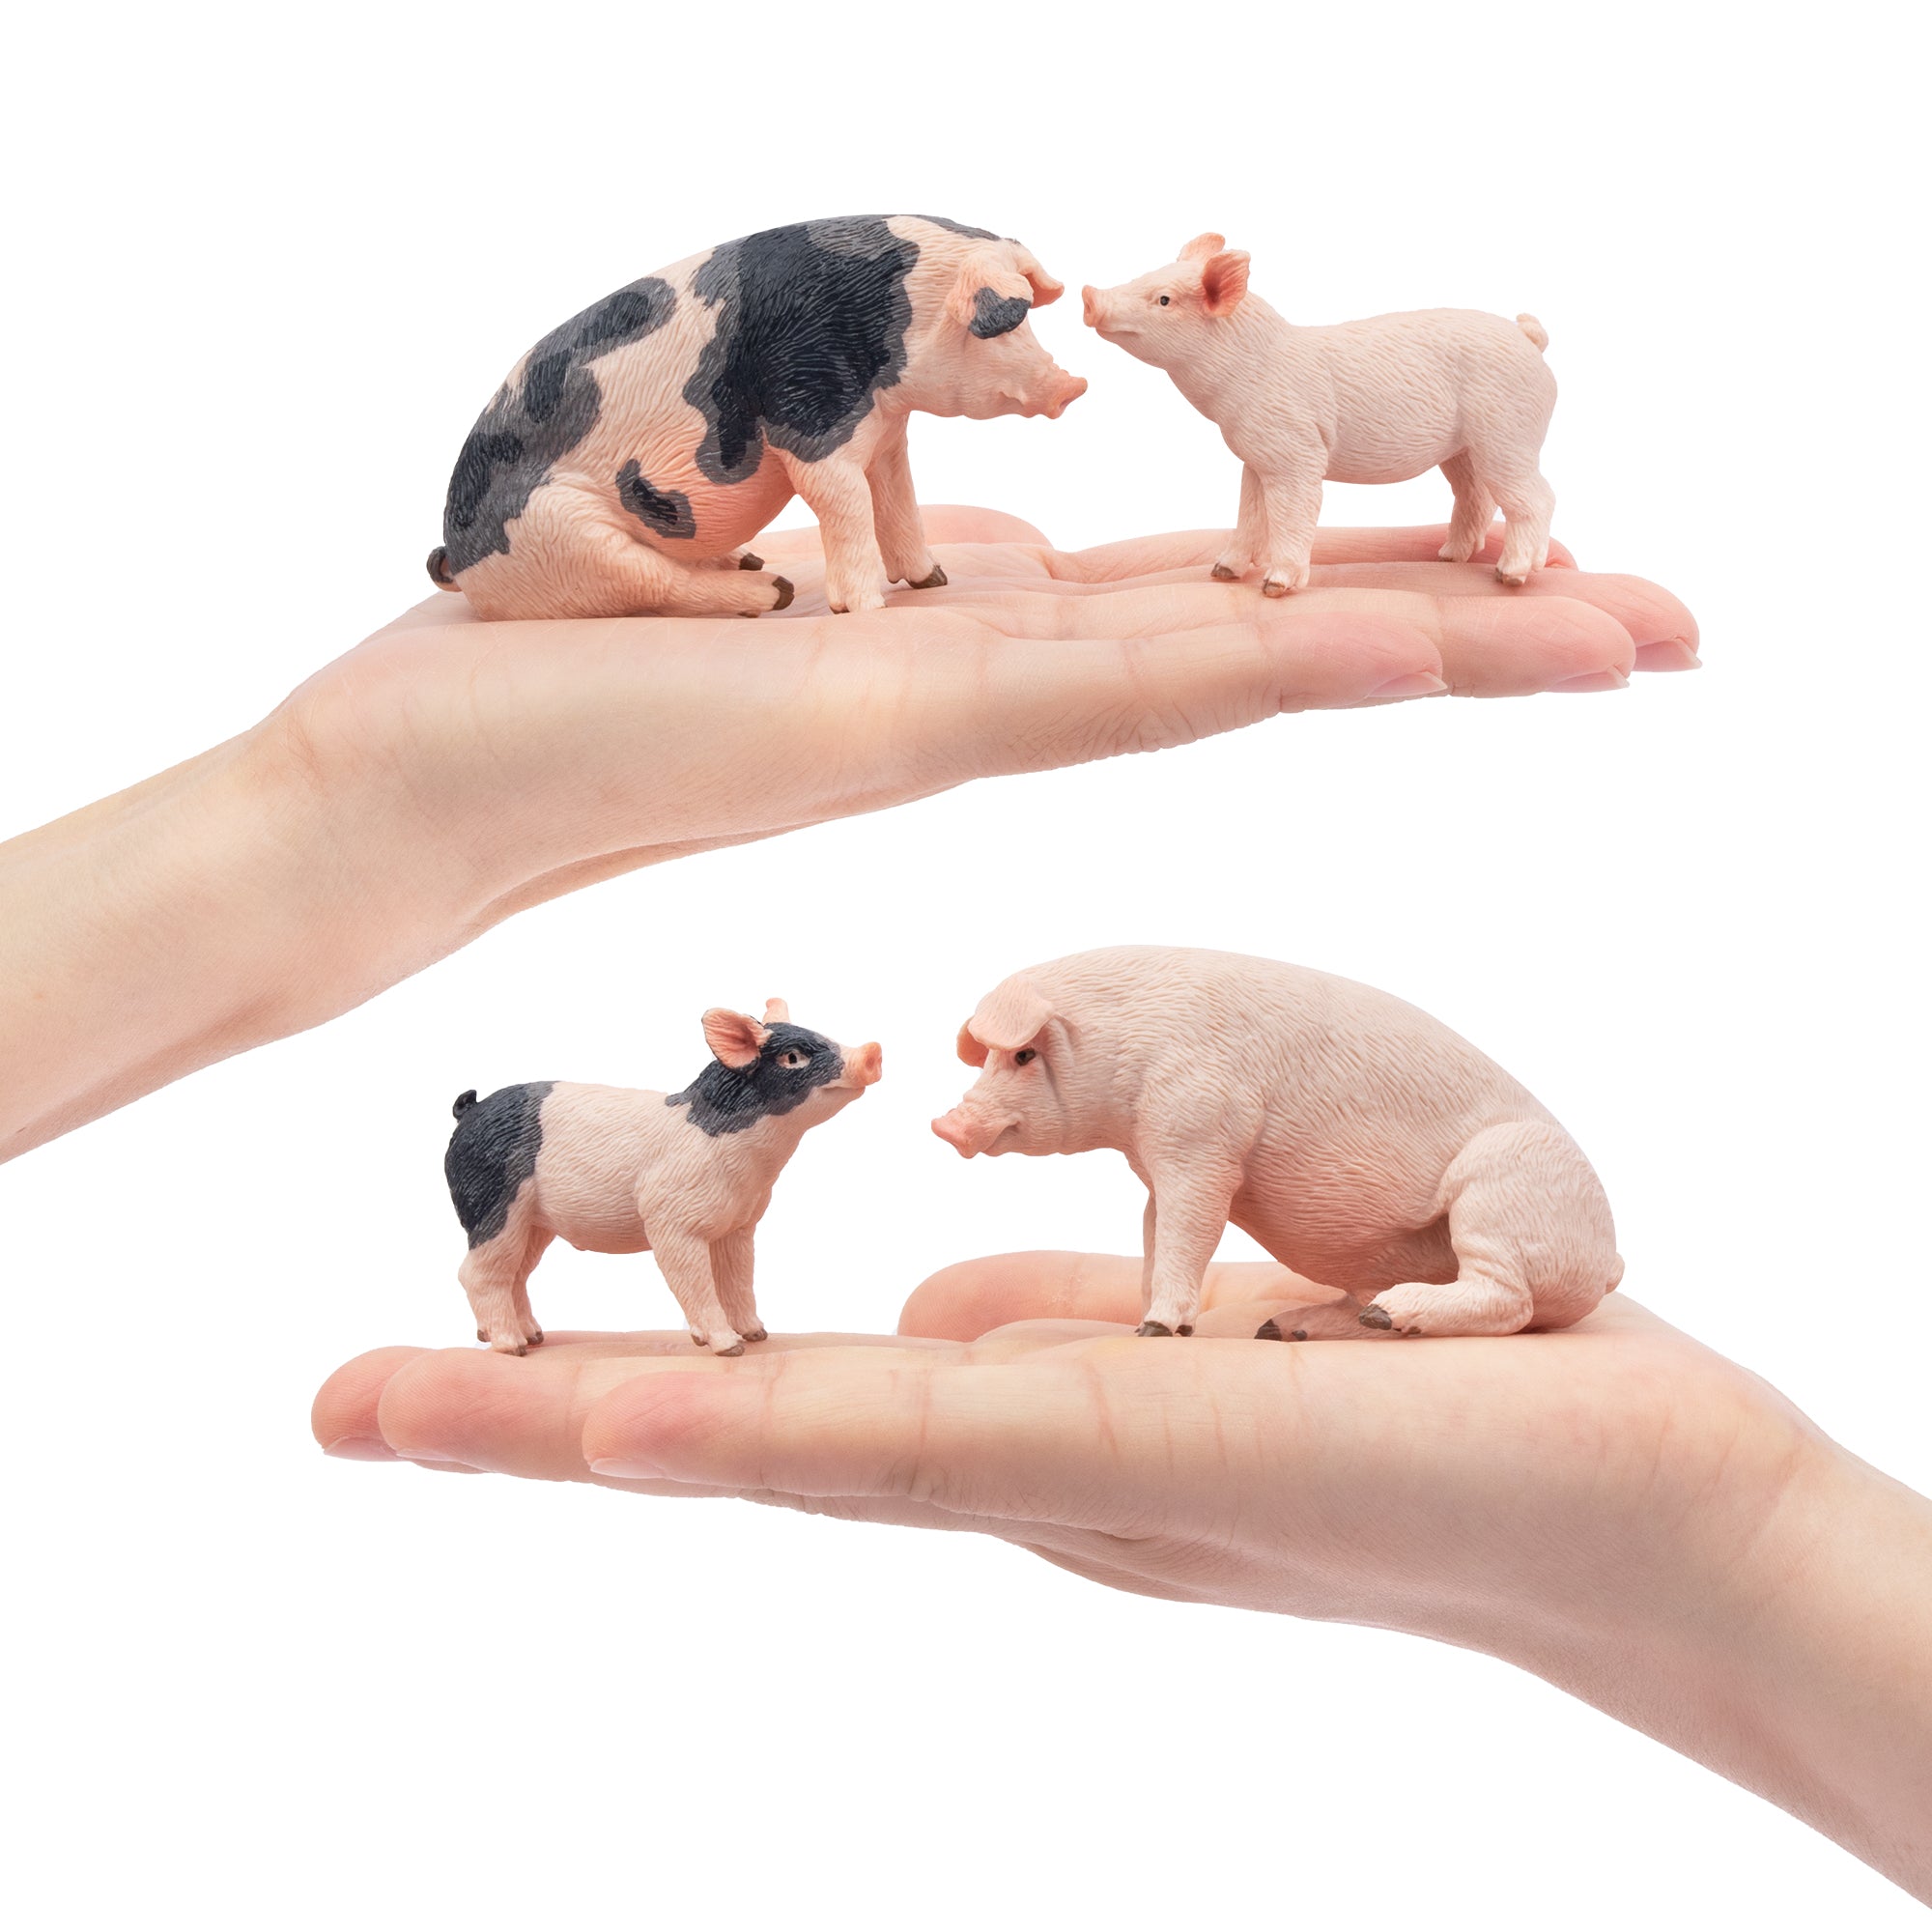 8-Piece Pig Family Figurines Playset with Adult & Baby Pigs-on hand